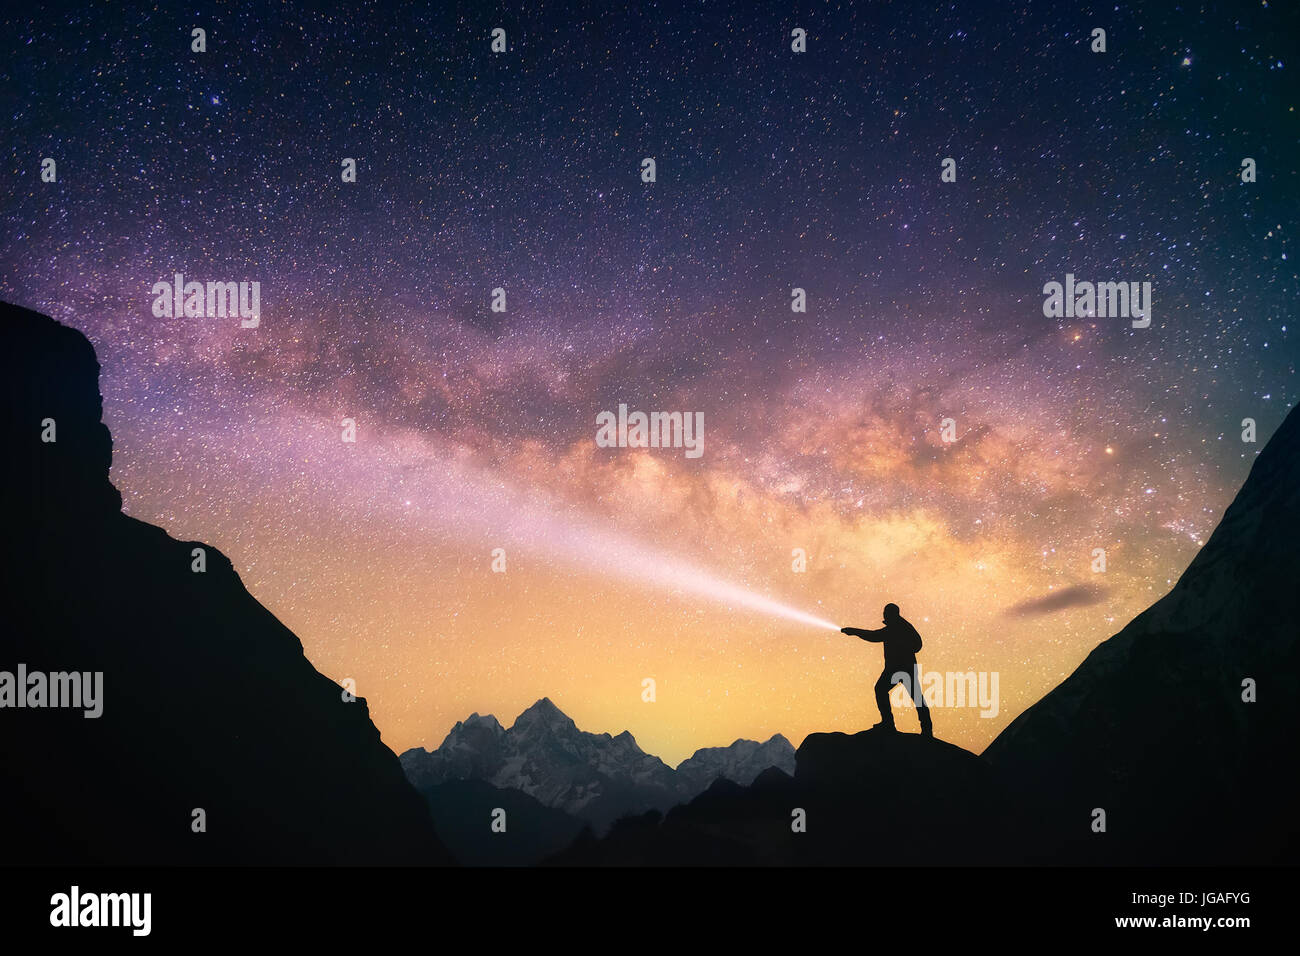 Silhouette of the man standing in the mountains with a flashlight in his hands. Nepal, Everest Region, view of the Mount Thamserku. Stock Photo